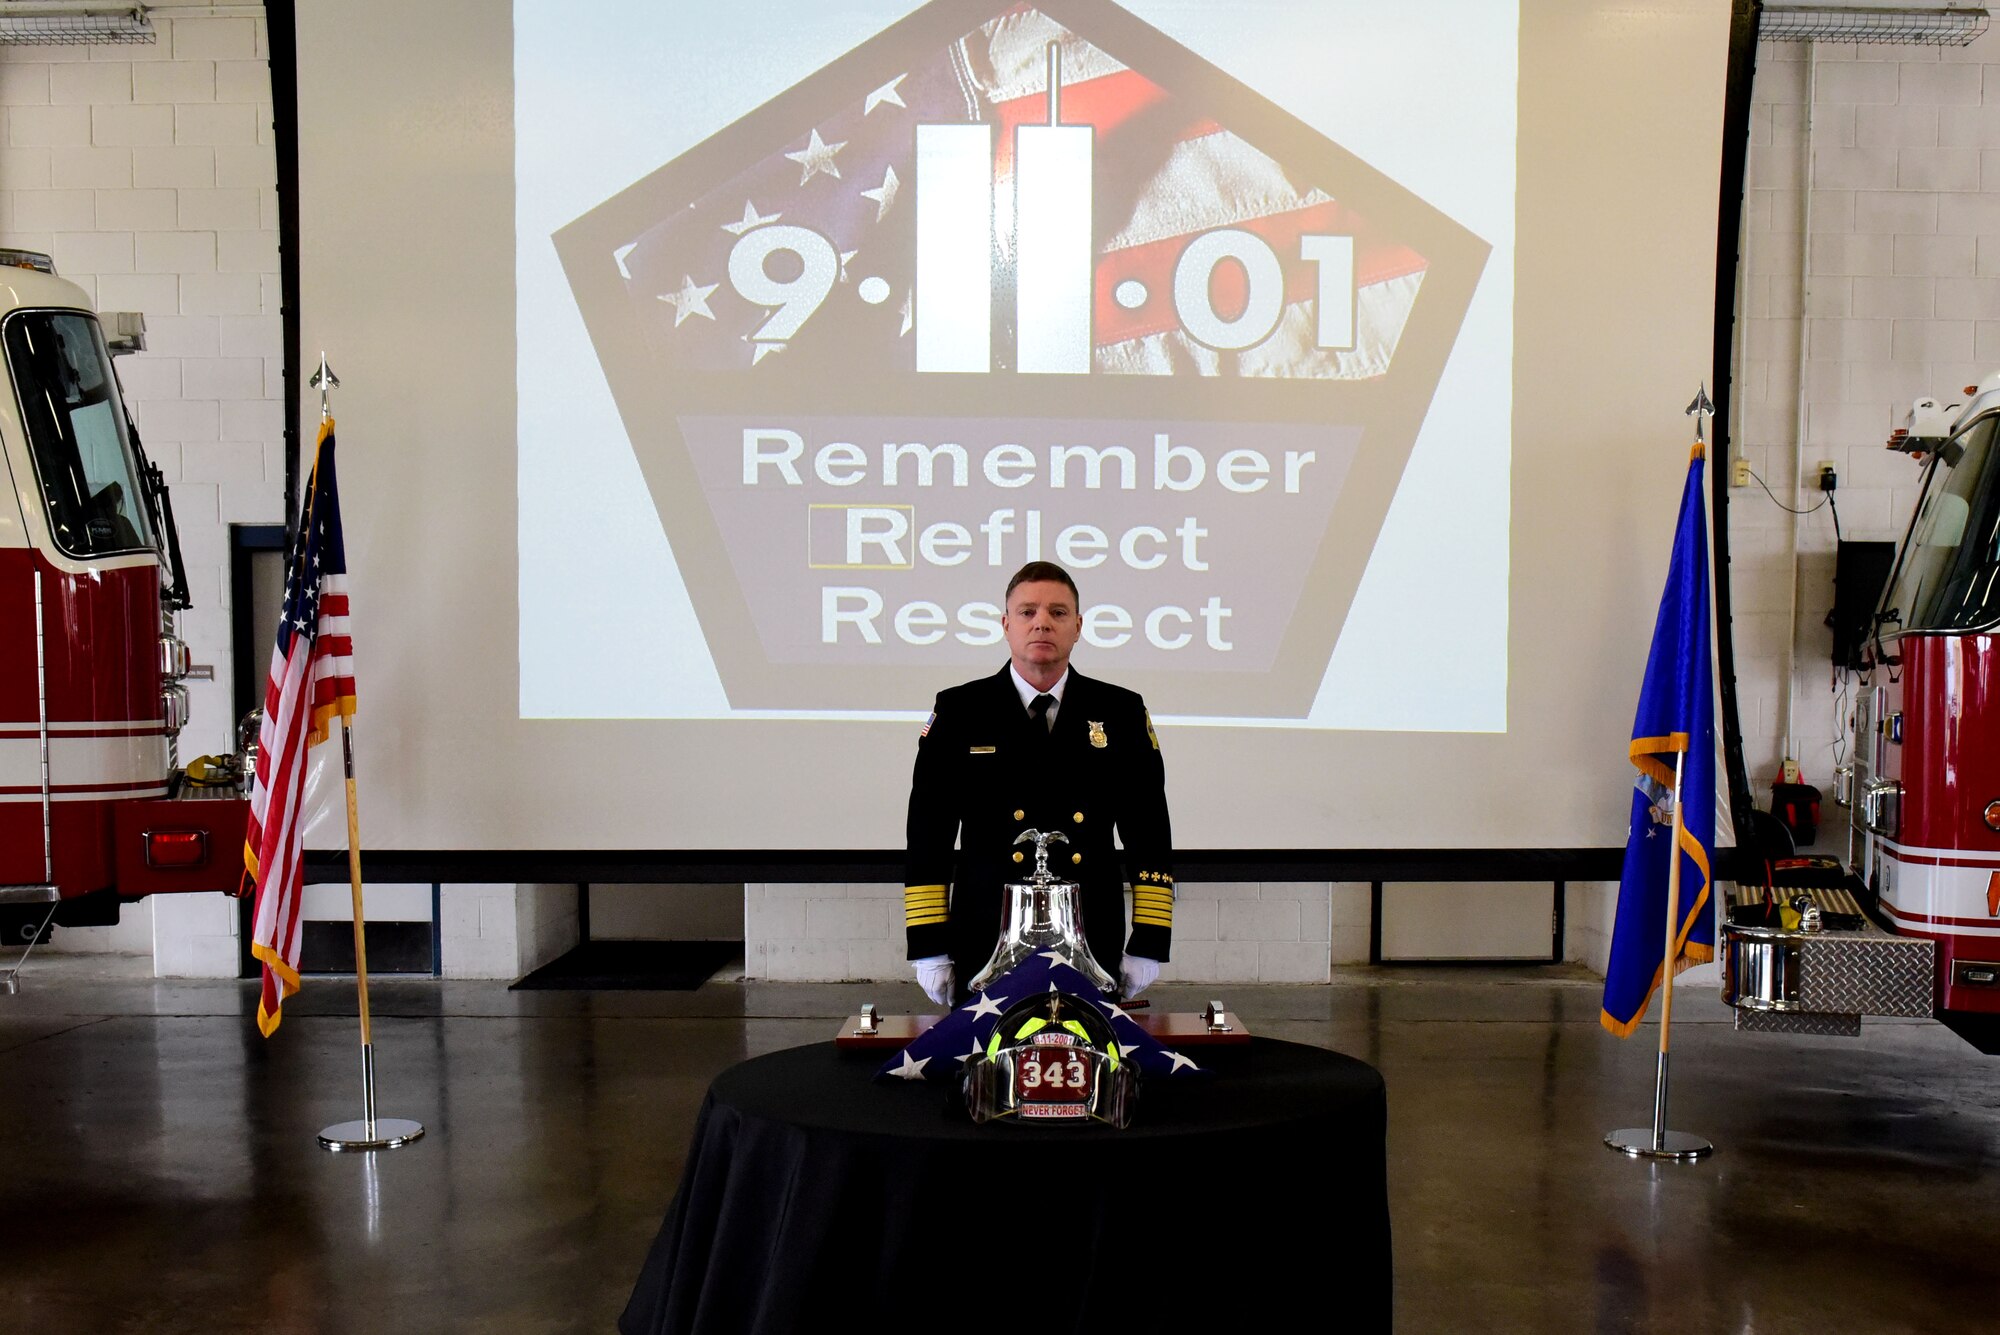 Sean Quinby, 4th Civil Engineer Squadron fire chief, rings a bell in honor of the fallen fire fighters during a 9/11 Remembrance Ceremony, Sept. 11, 2017, at Seymour Johnson Air Force Base, North Carolina. On Sept. 11, 2001, a total of 19 terrorists hijacked four commercial passenger jet airliners and took the lives of thousands of men, women, and children. (U.S. Air Force photo by Airman 1st Class Victoria Boyton)